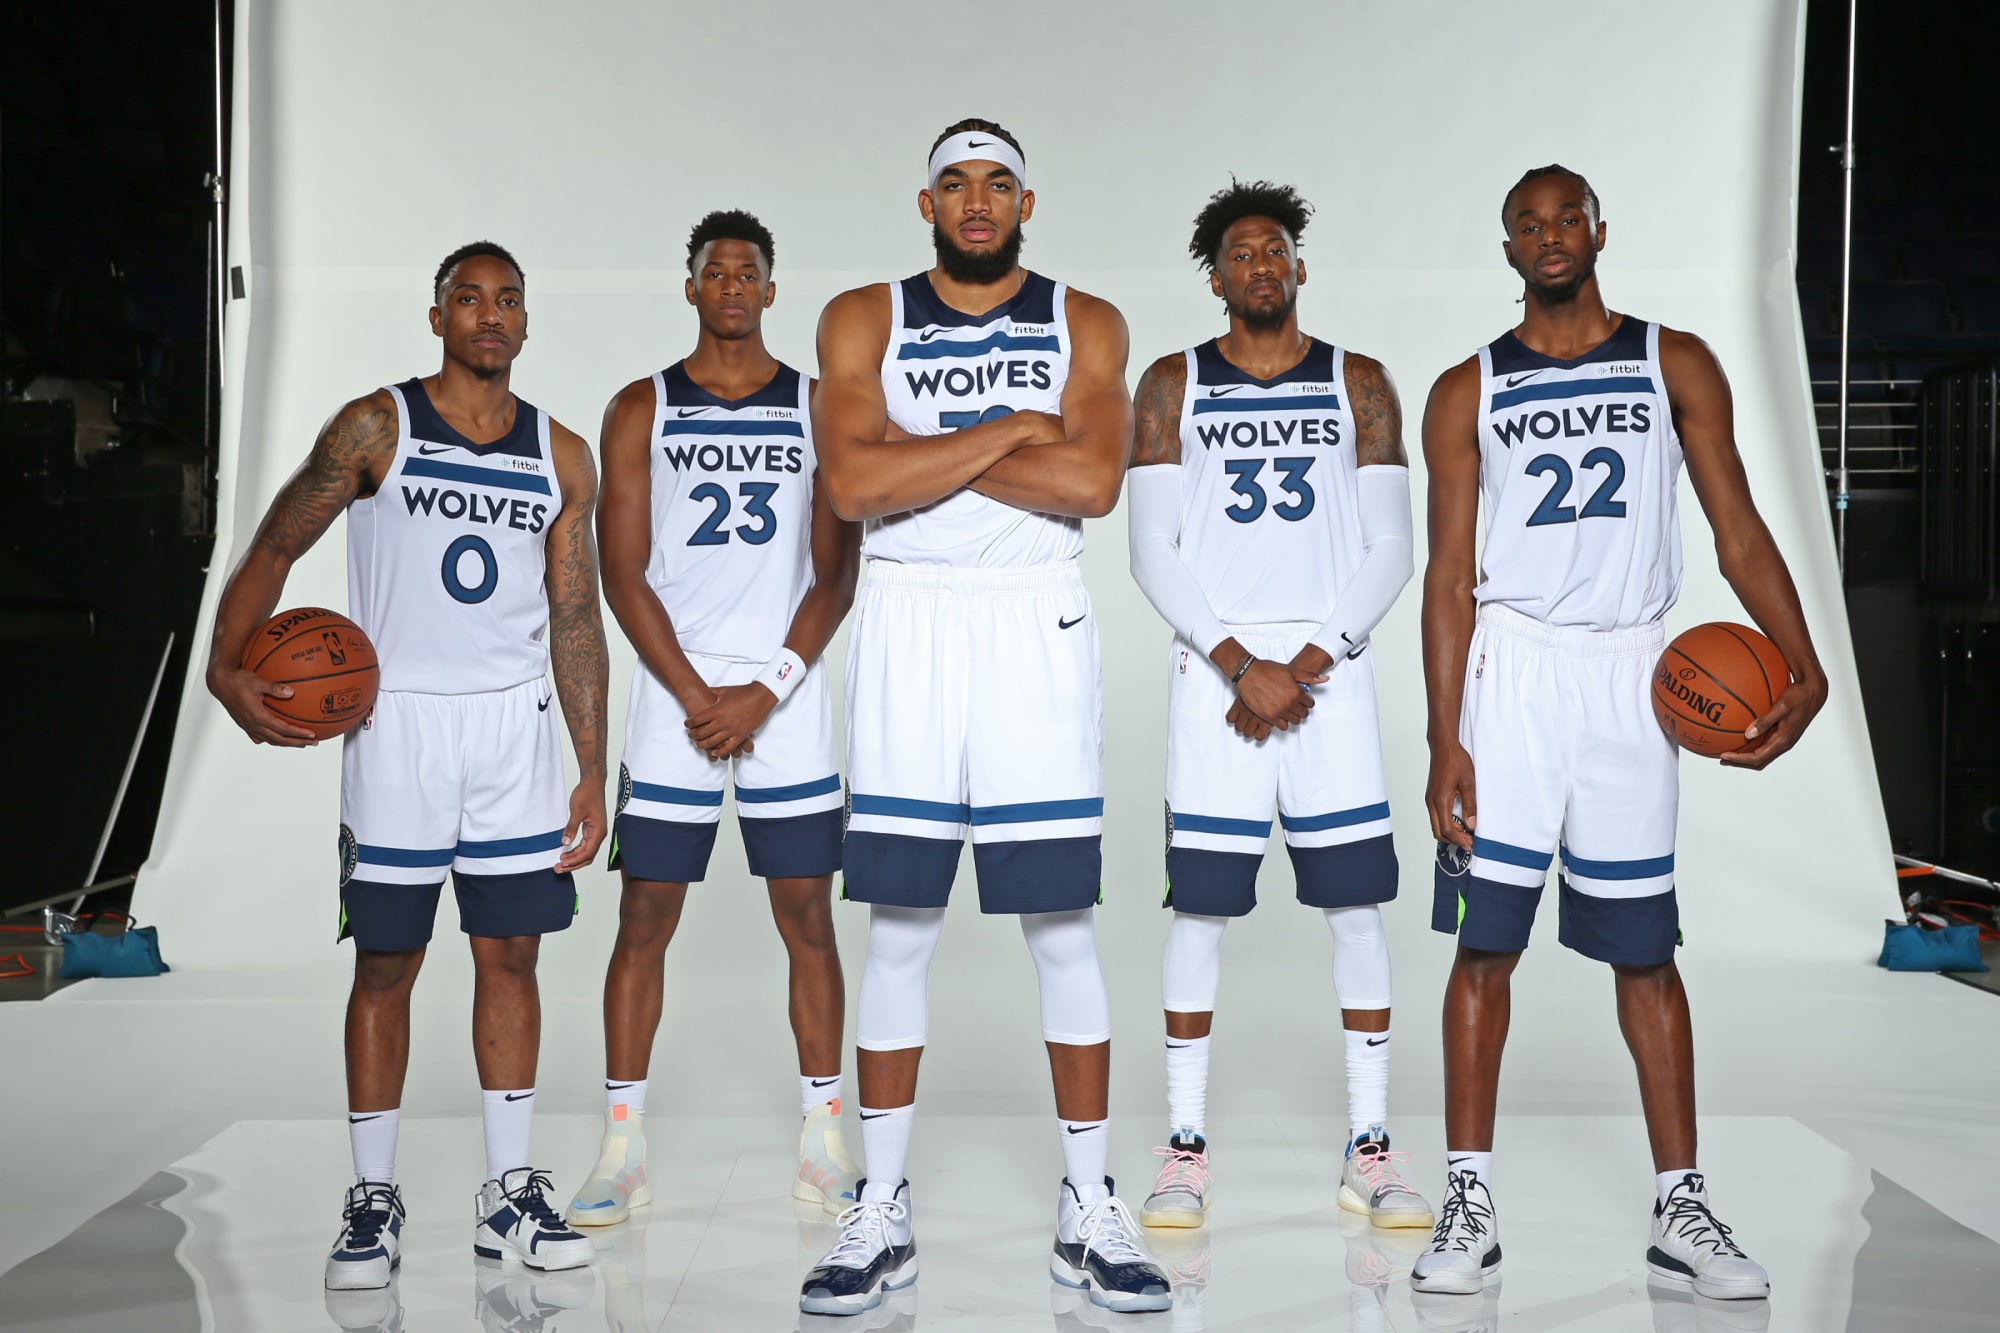 Minnesota Timberwolves The Wolves aren't exactly irrelevant